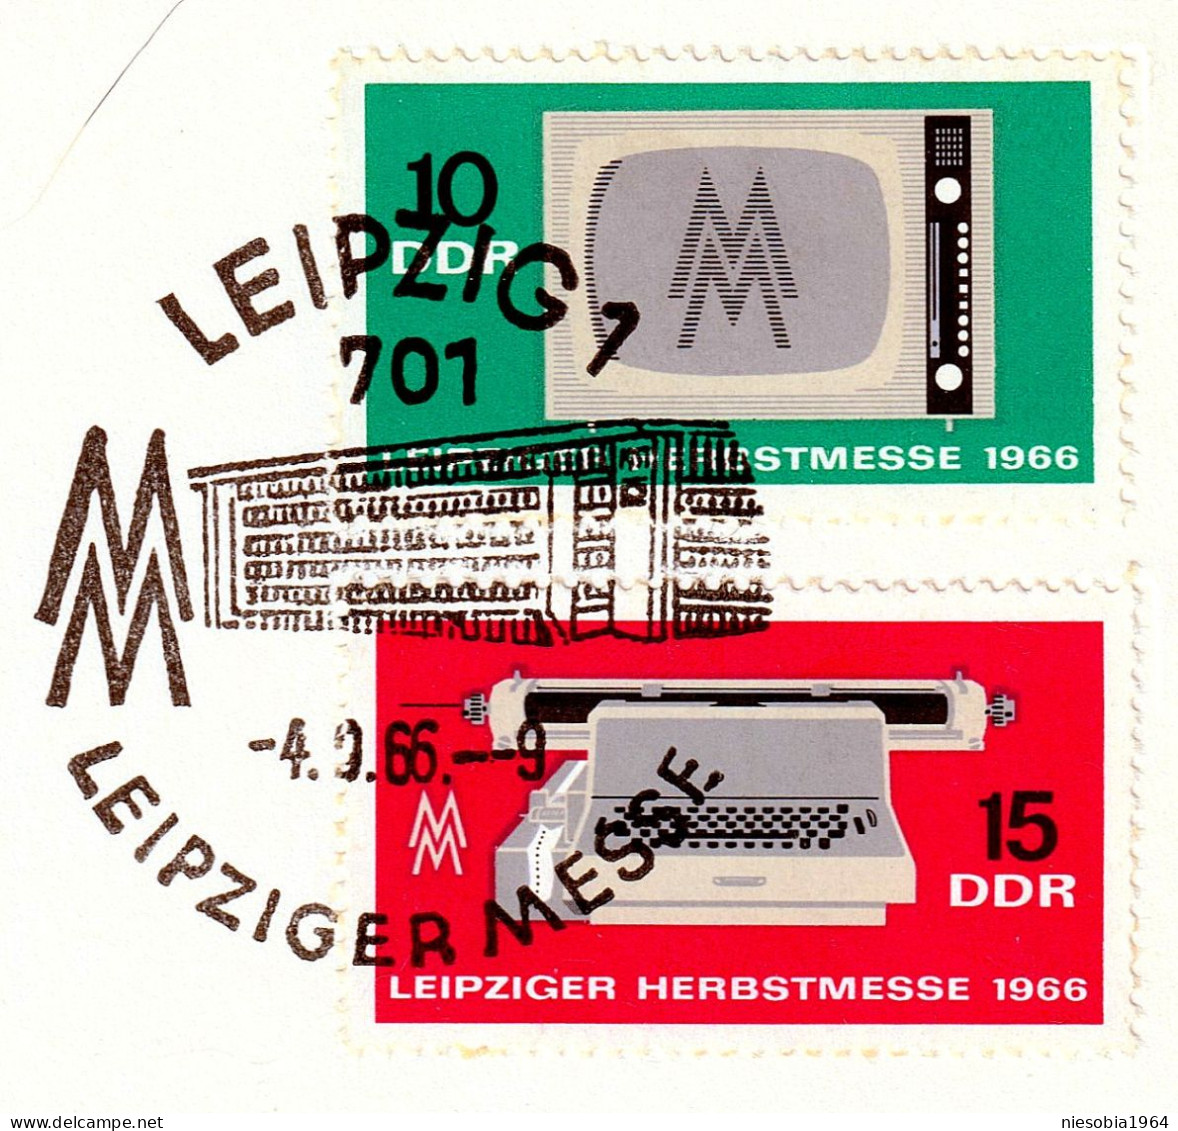 20 Years Of Peace Fair Autumn Fair LEIPZIG 1966 - Two Stamps + Occasional Seals - Postkarten - Gebraucht